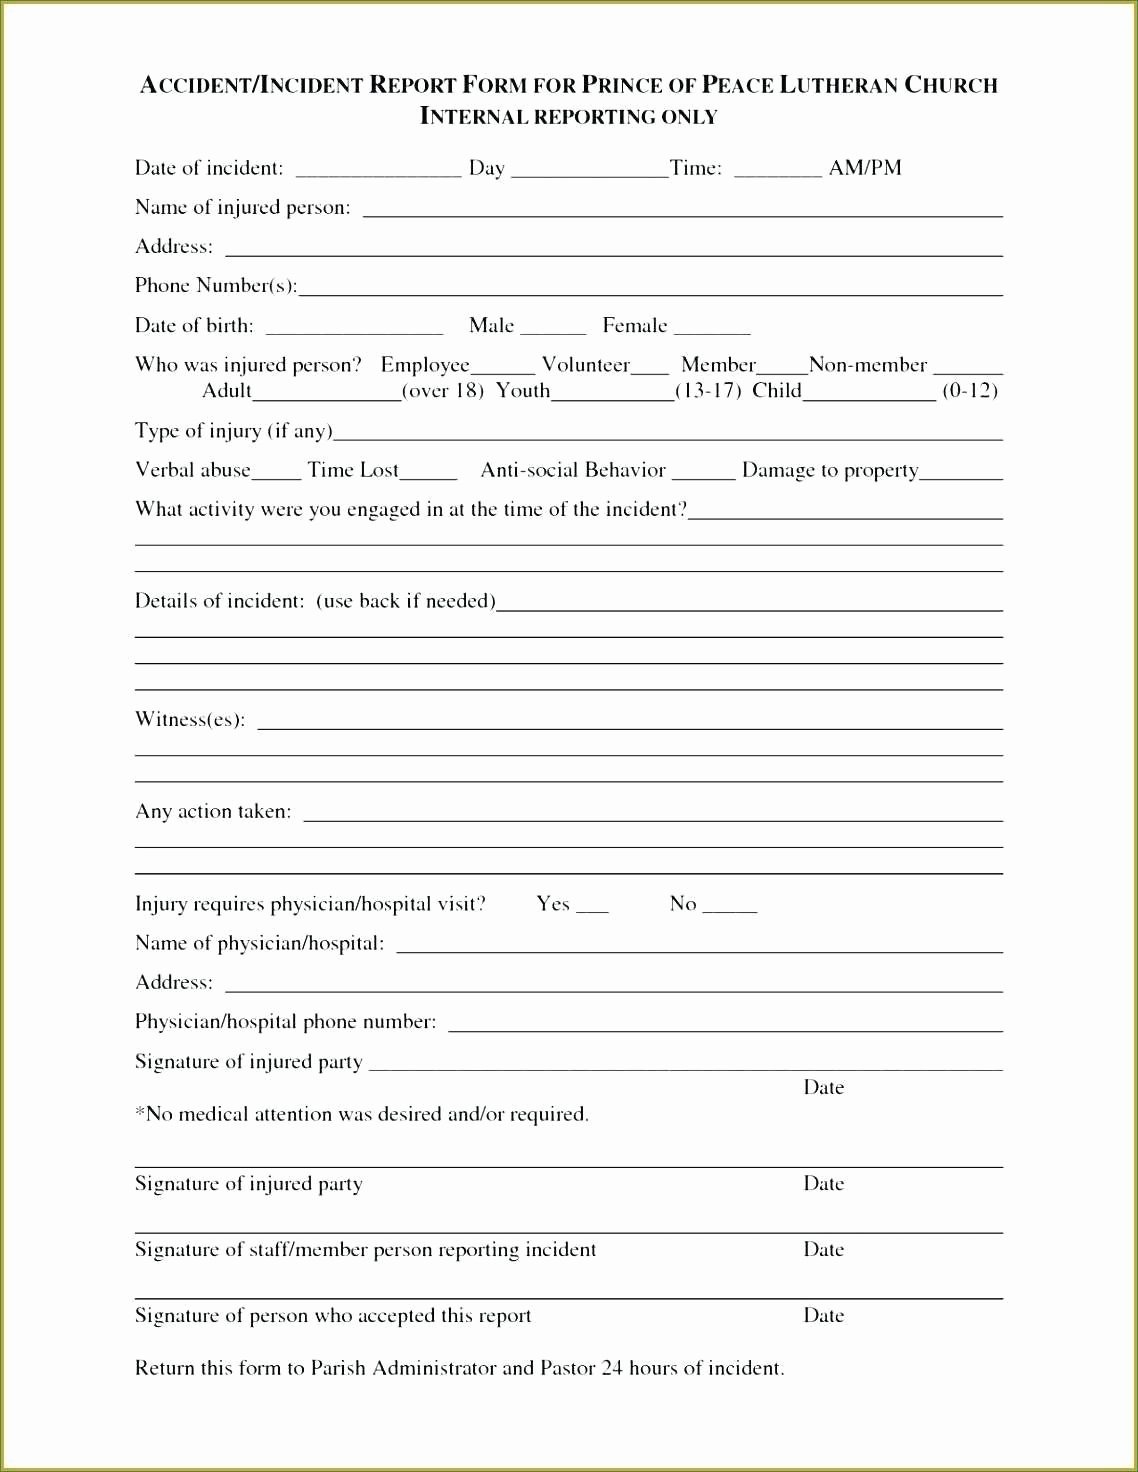 Free Registration forms Template New Registration form Template Free Download Fancy form Church